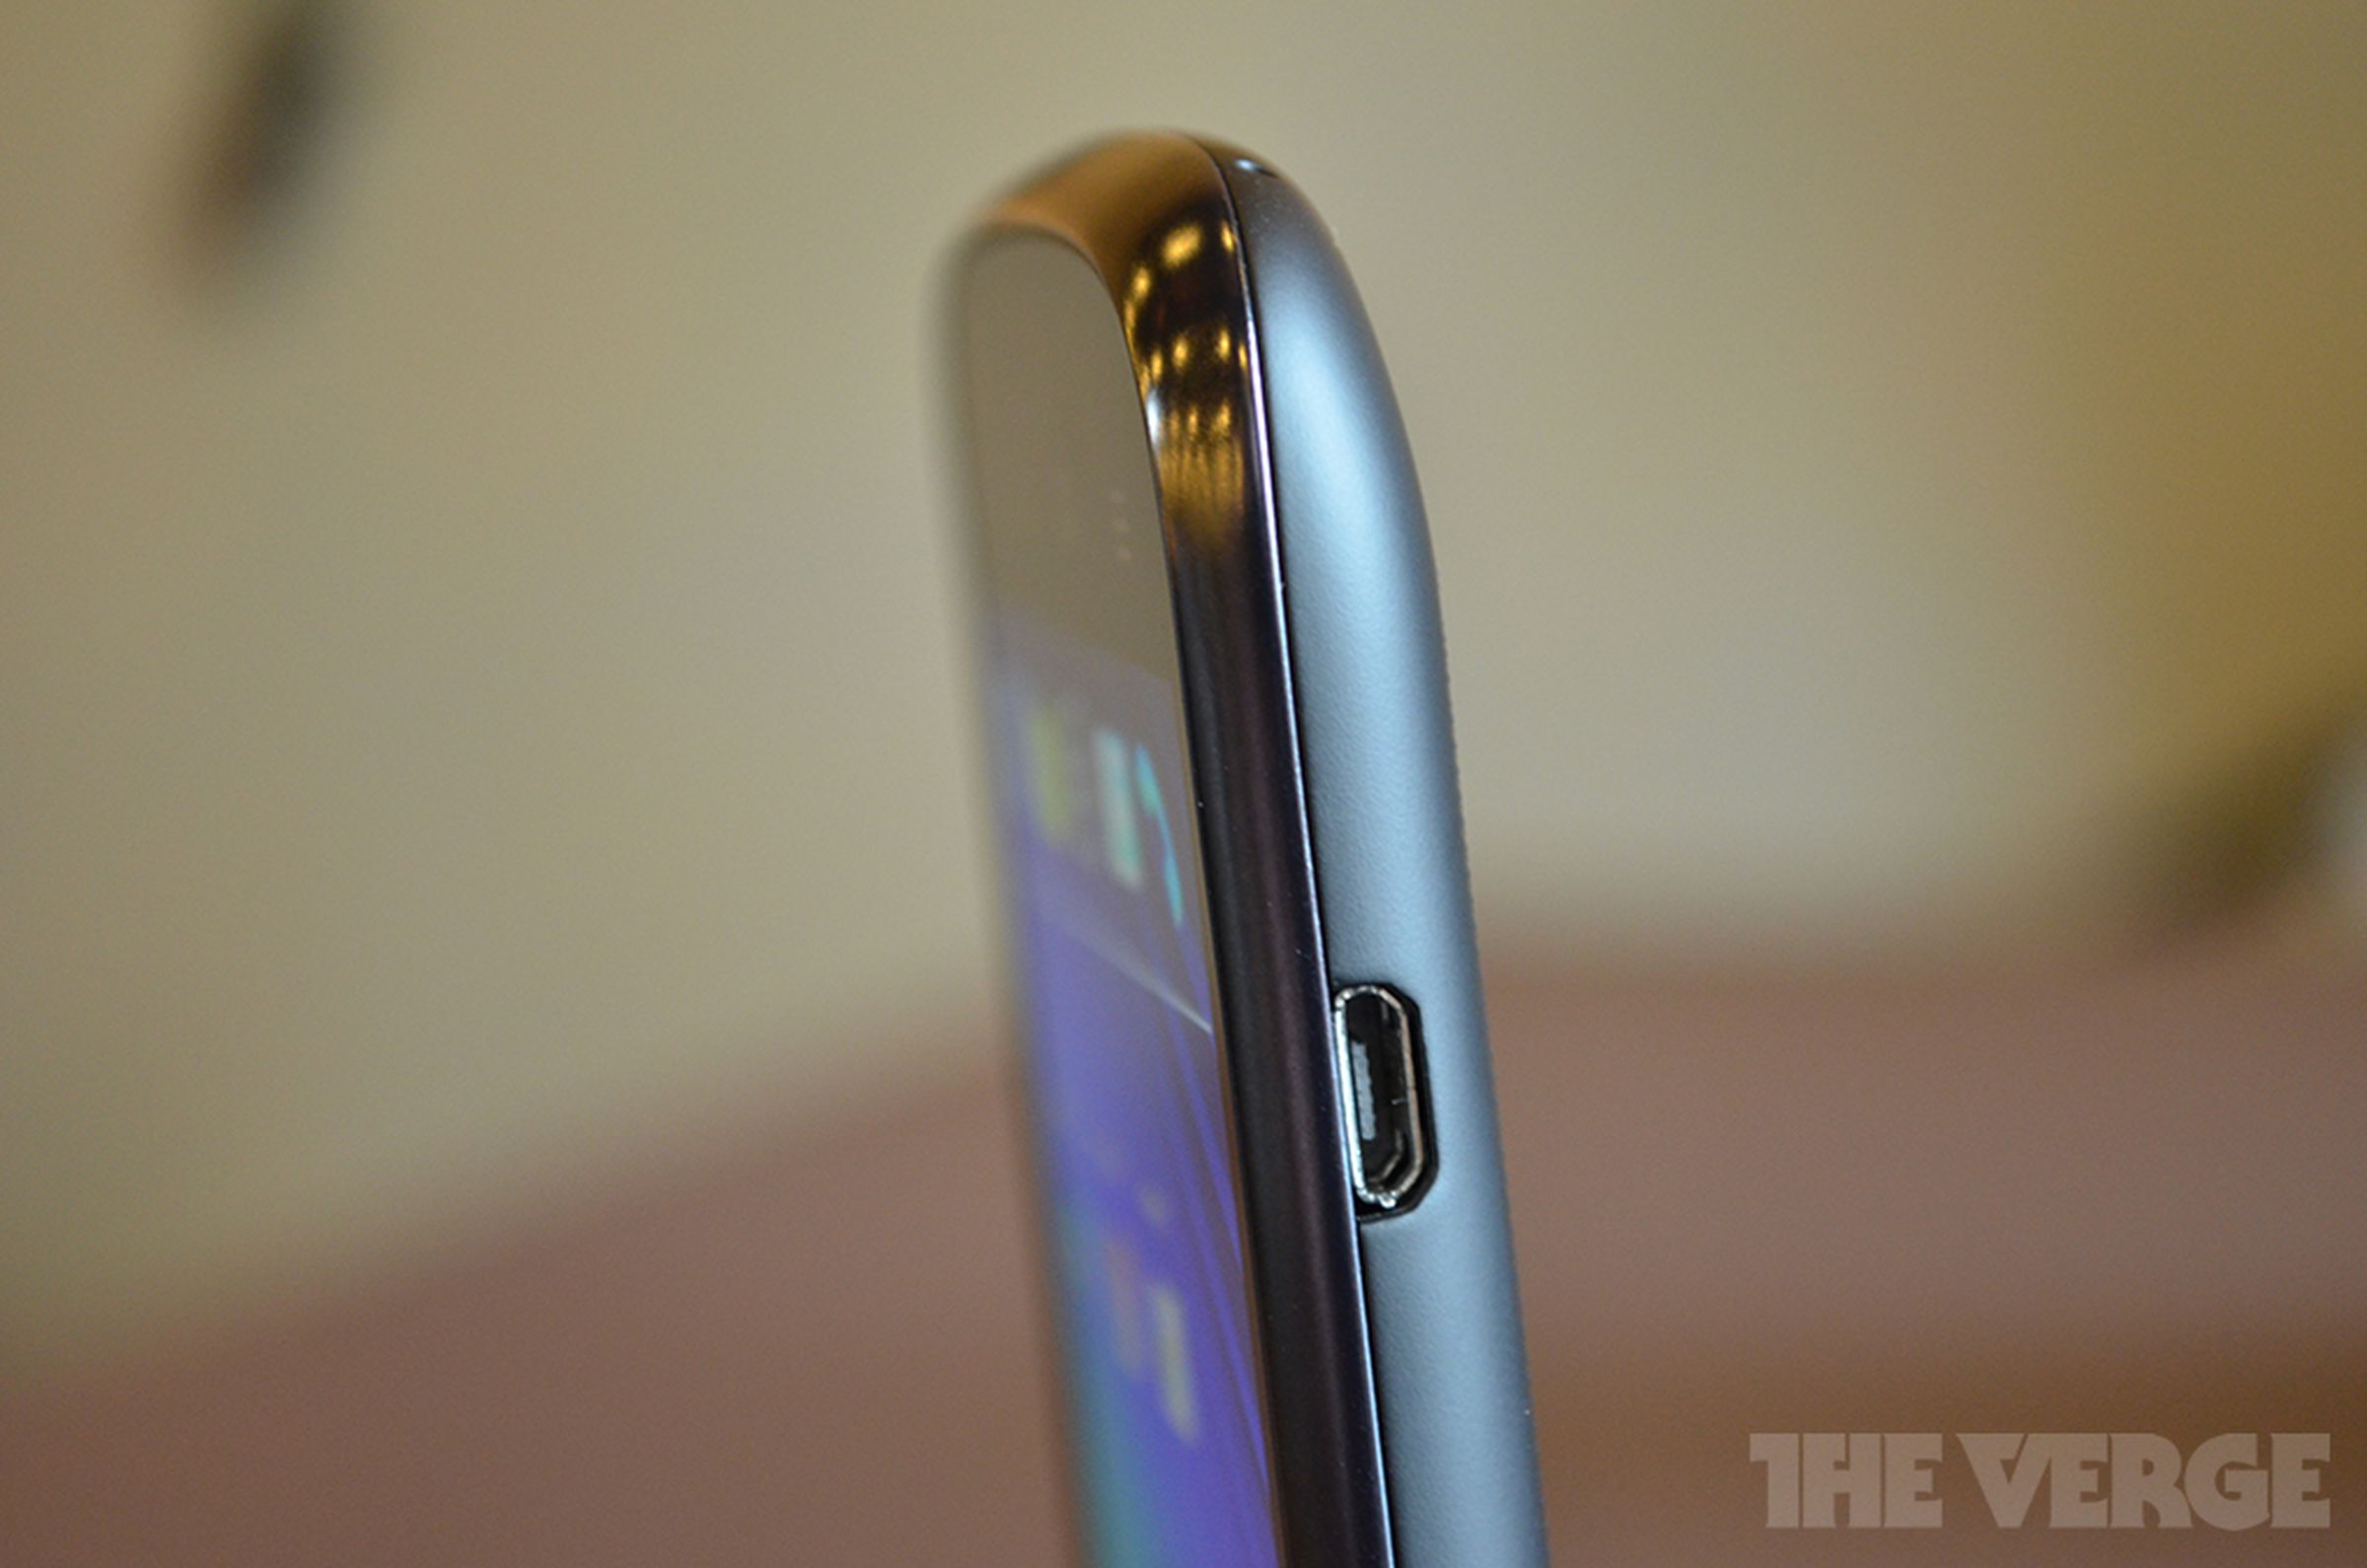 ZTE Grand X hands-on pictures